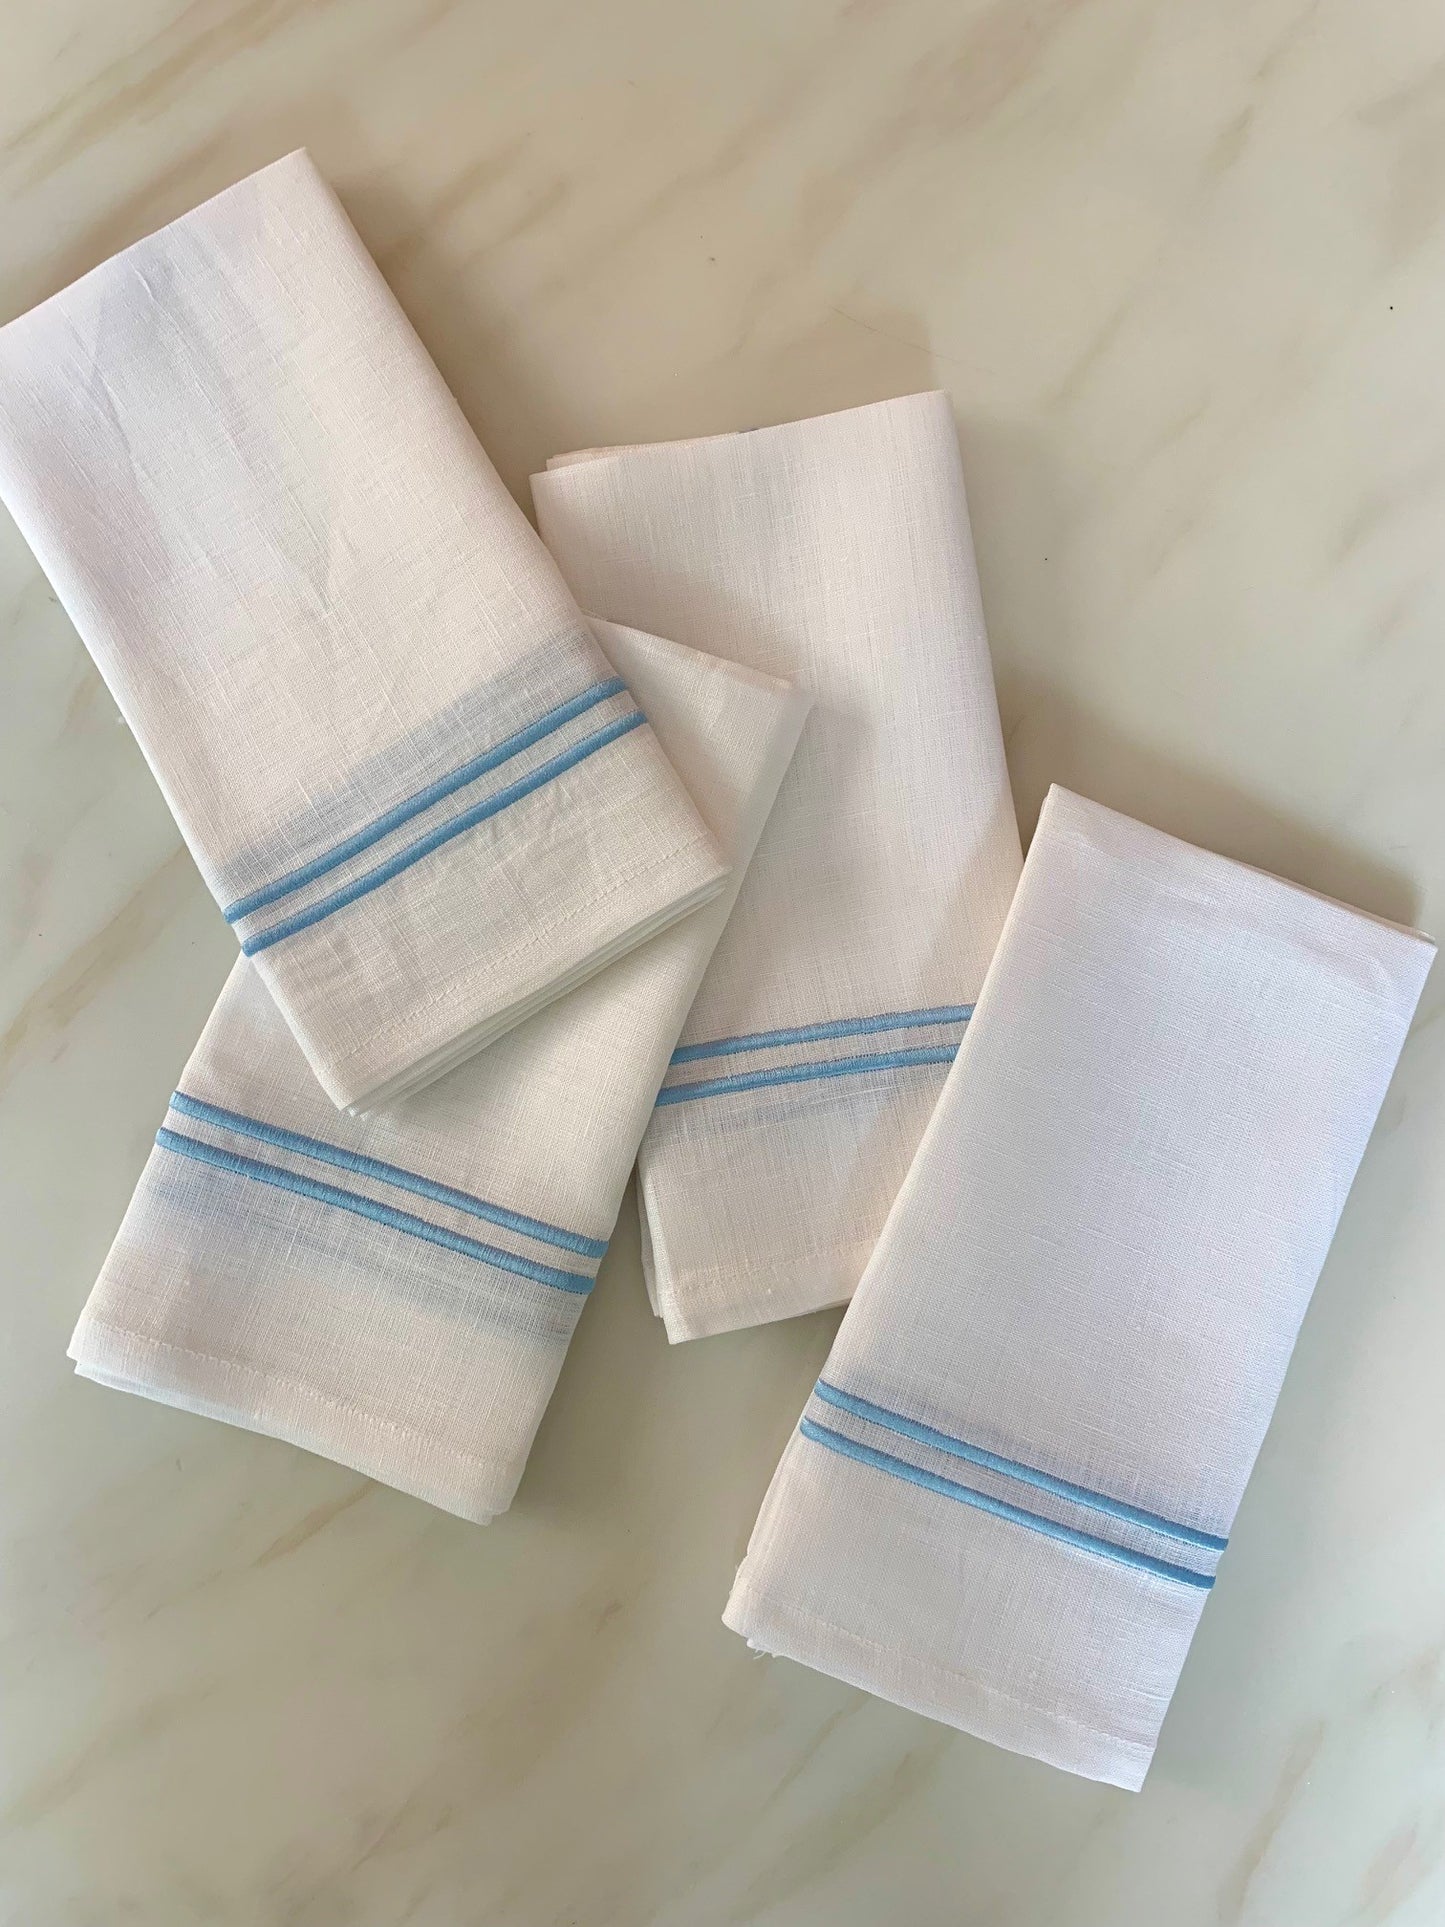 4 white linen napkins with sky blue double piping